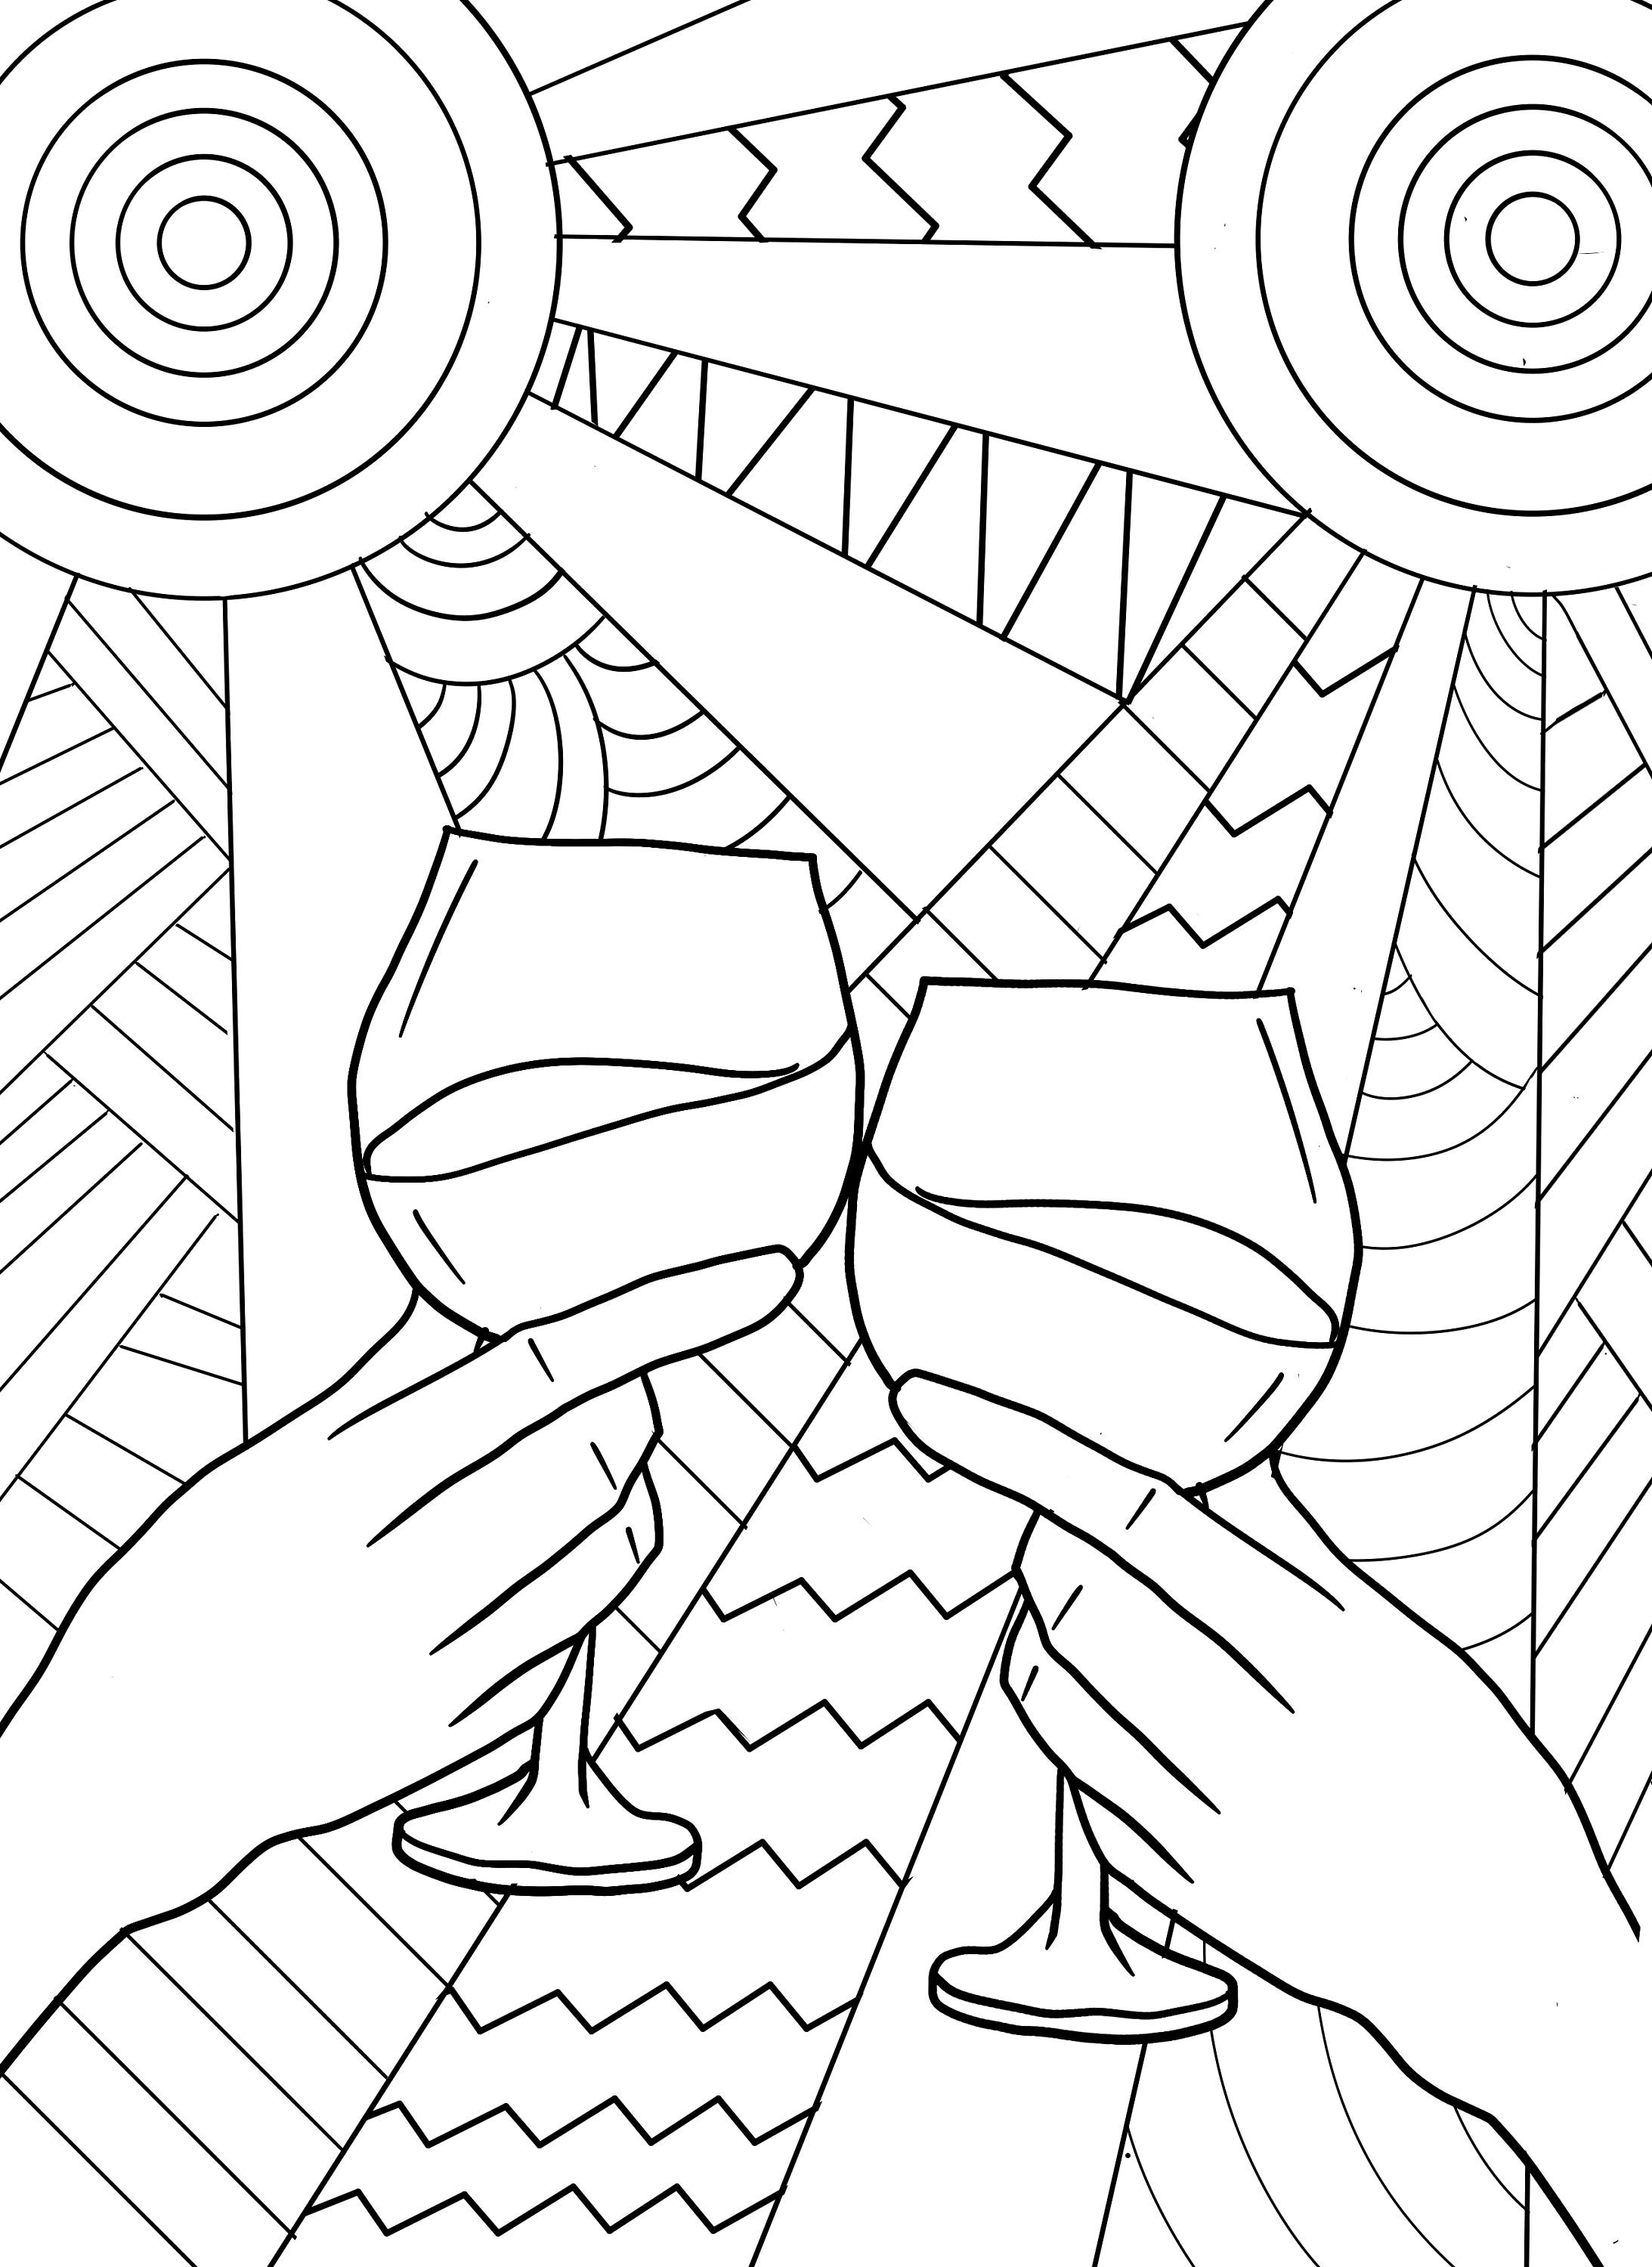 Wine toast at sunset coloring page digital download pdf wine glasses sun toast download now